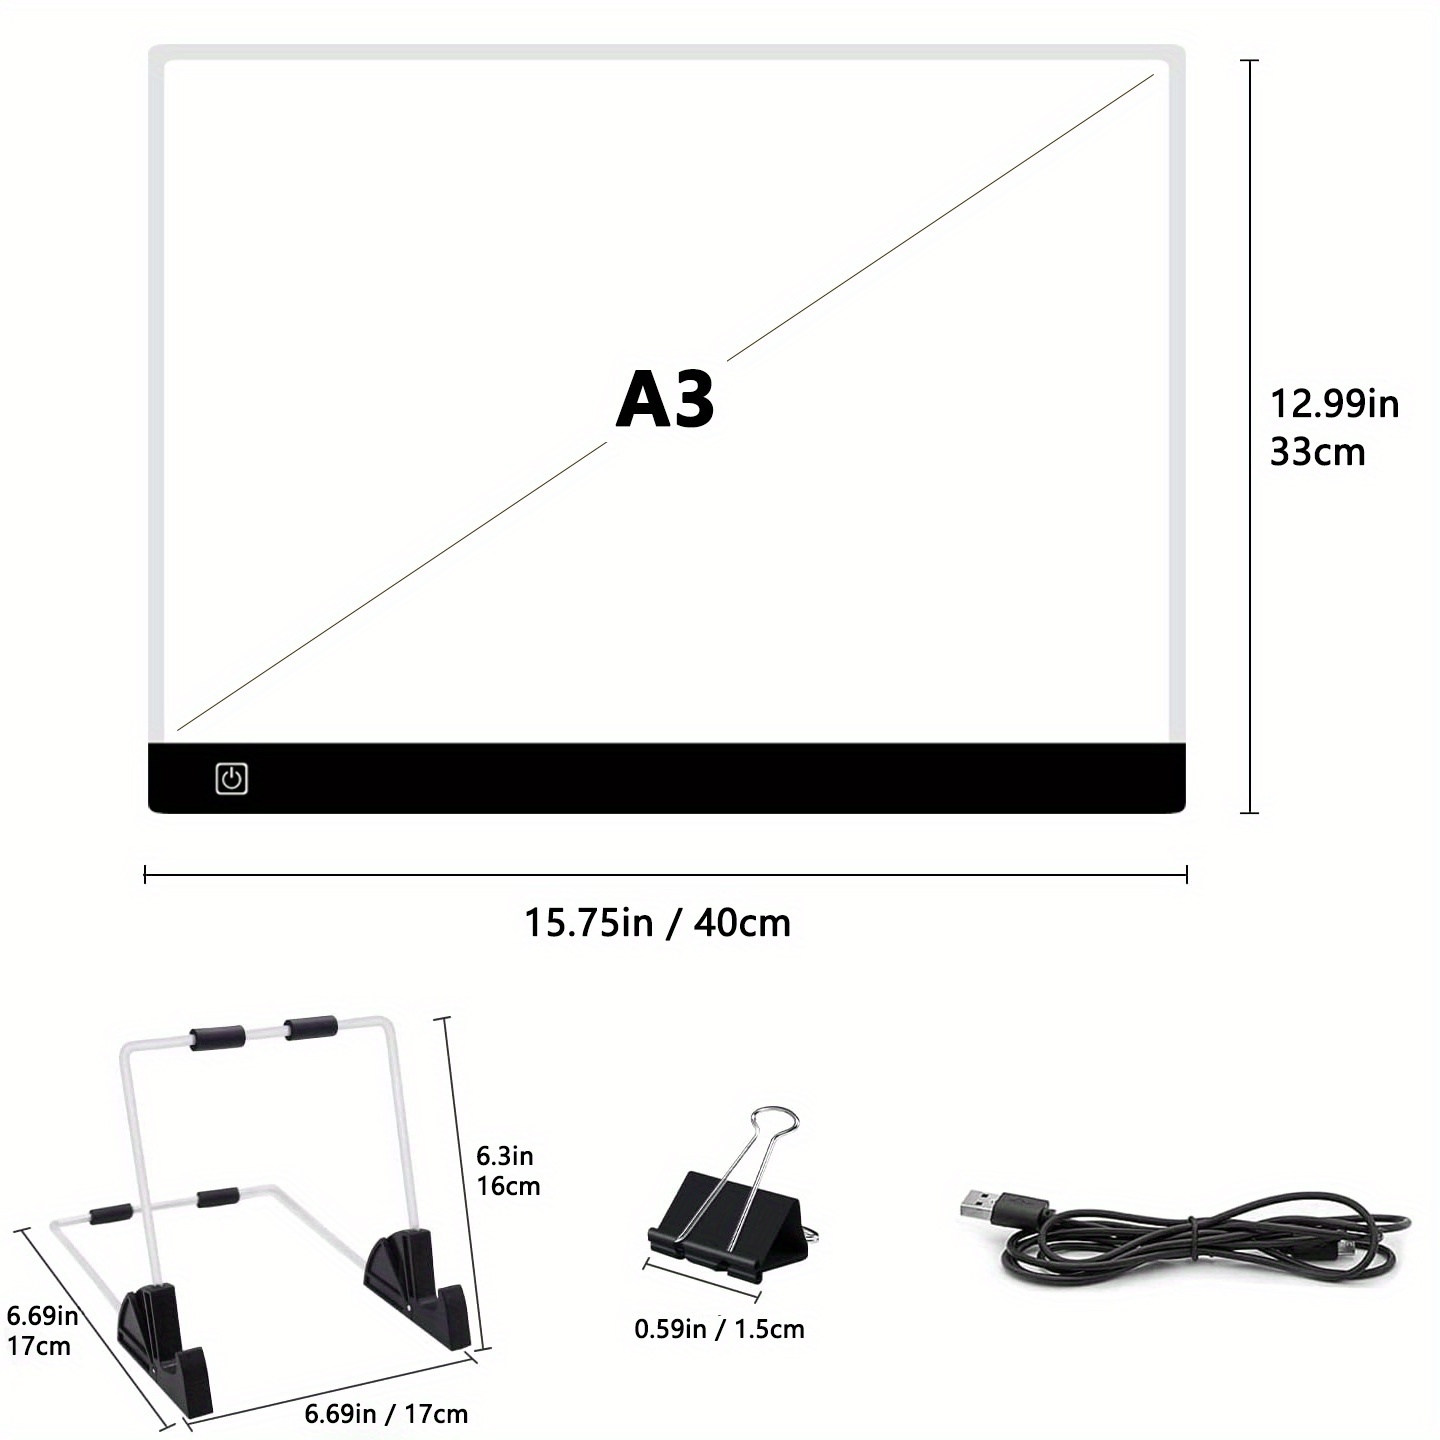 A3 / A4 Size] Adjustable Brightness Tracing Light Box with USB-C